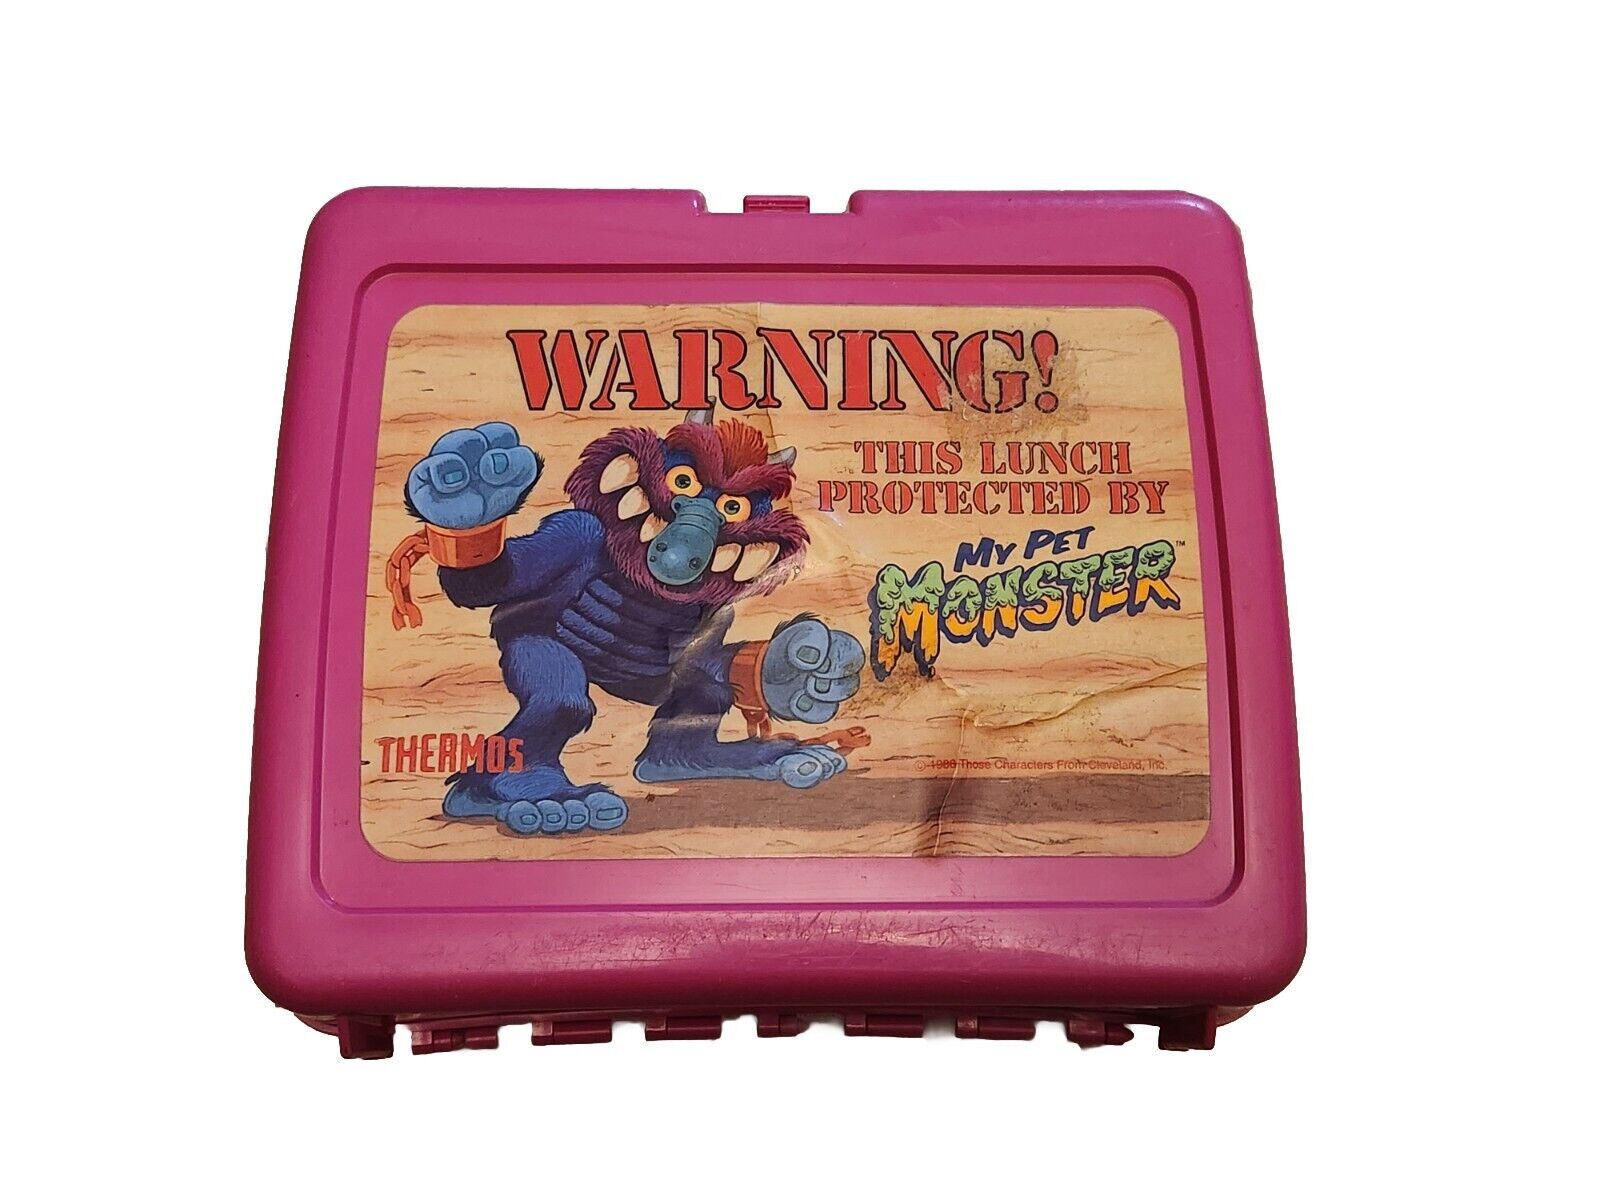 VINTAGE 1986 MY PET MONSTER ONLY LUNCHBOX RARE PINK 